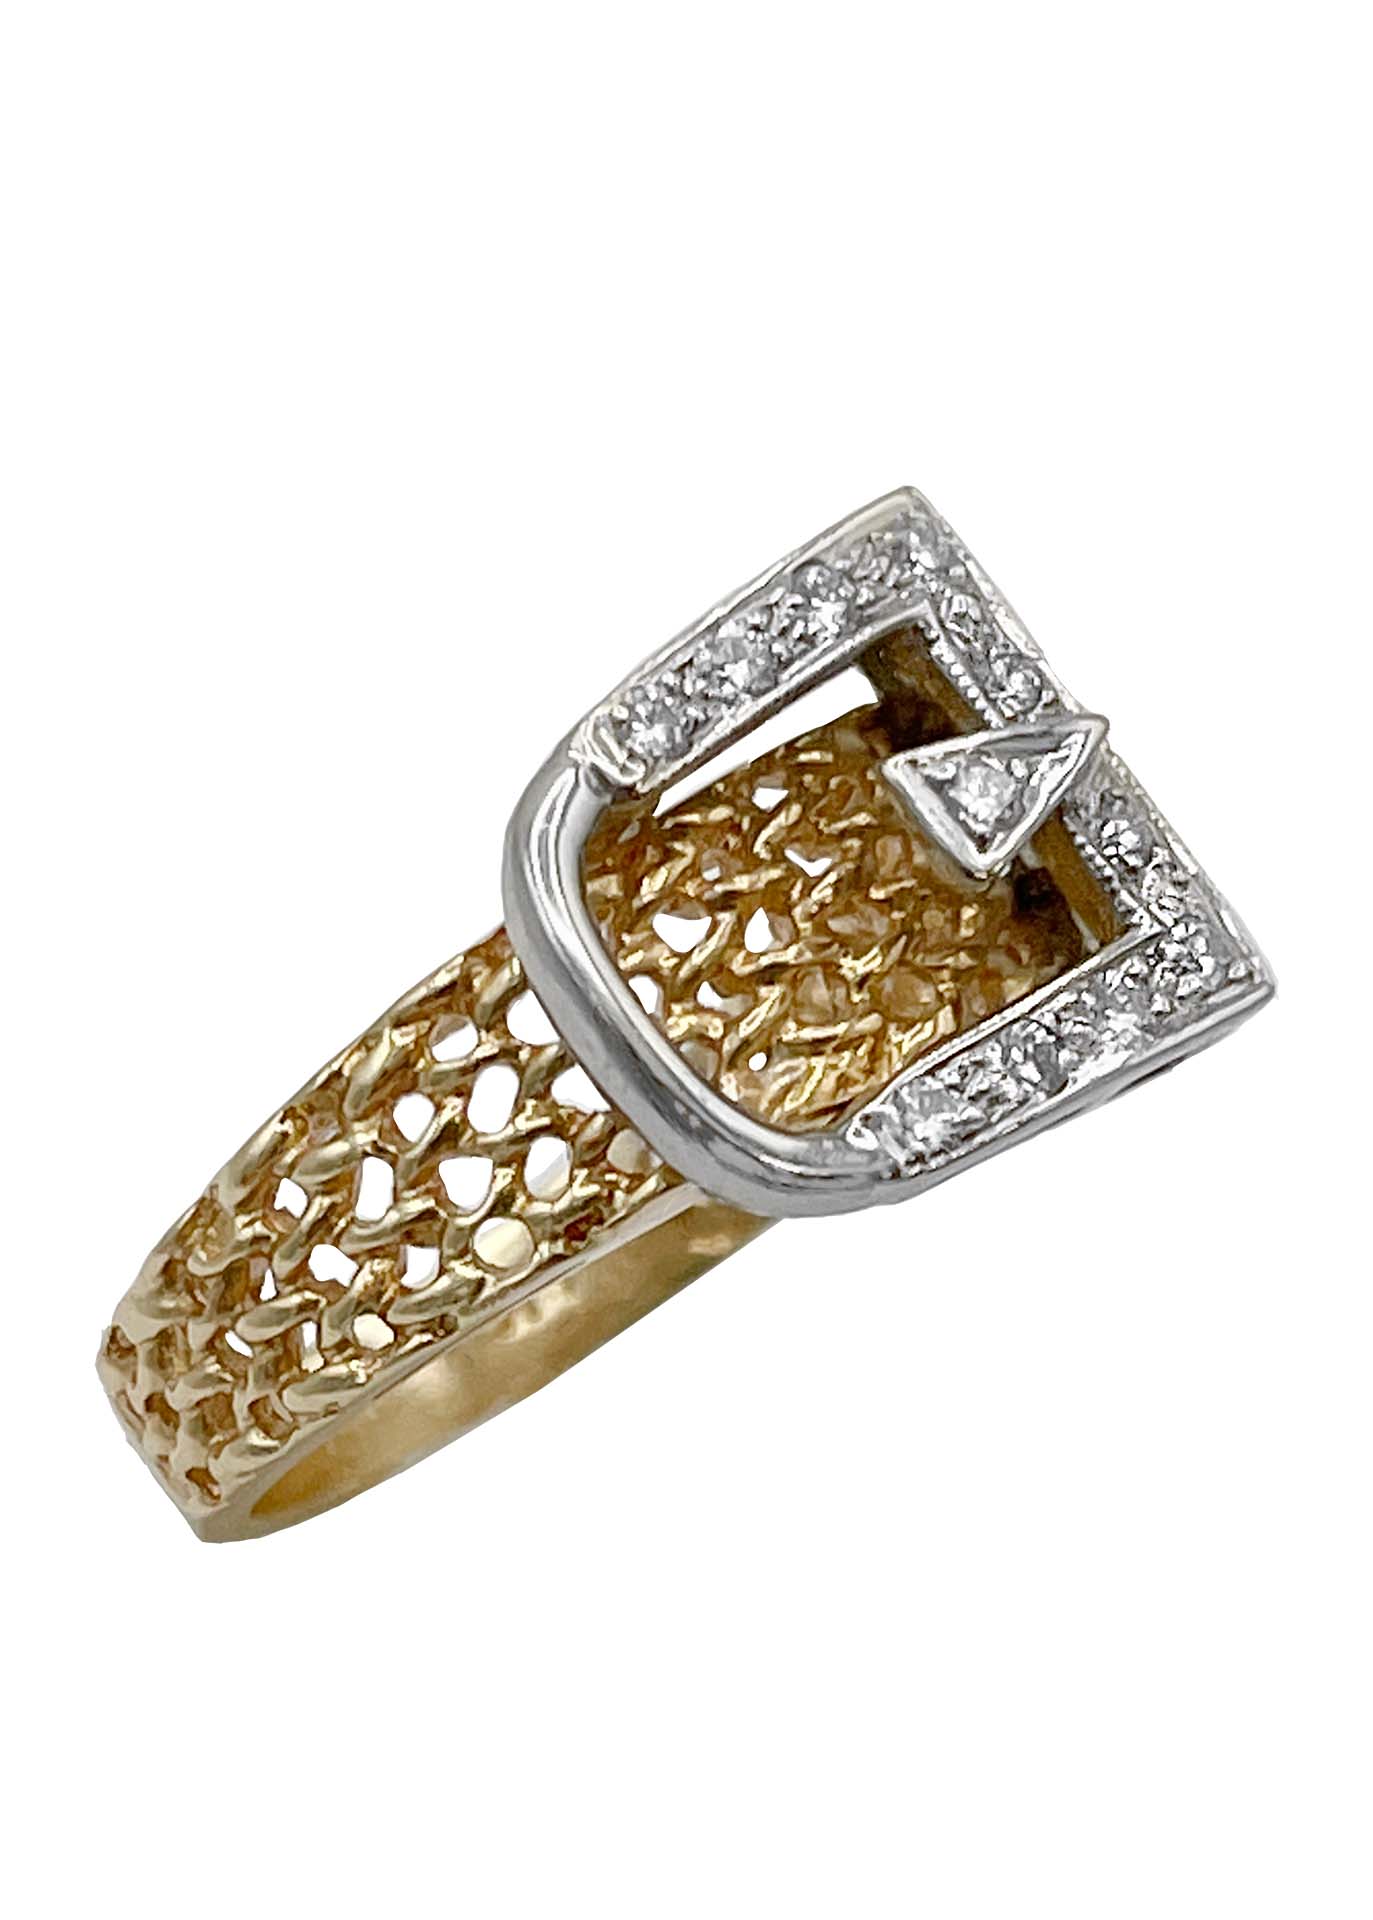 14k Yellow and White Mesh Buckle Ring with Diamonds Image